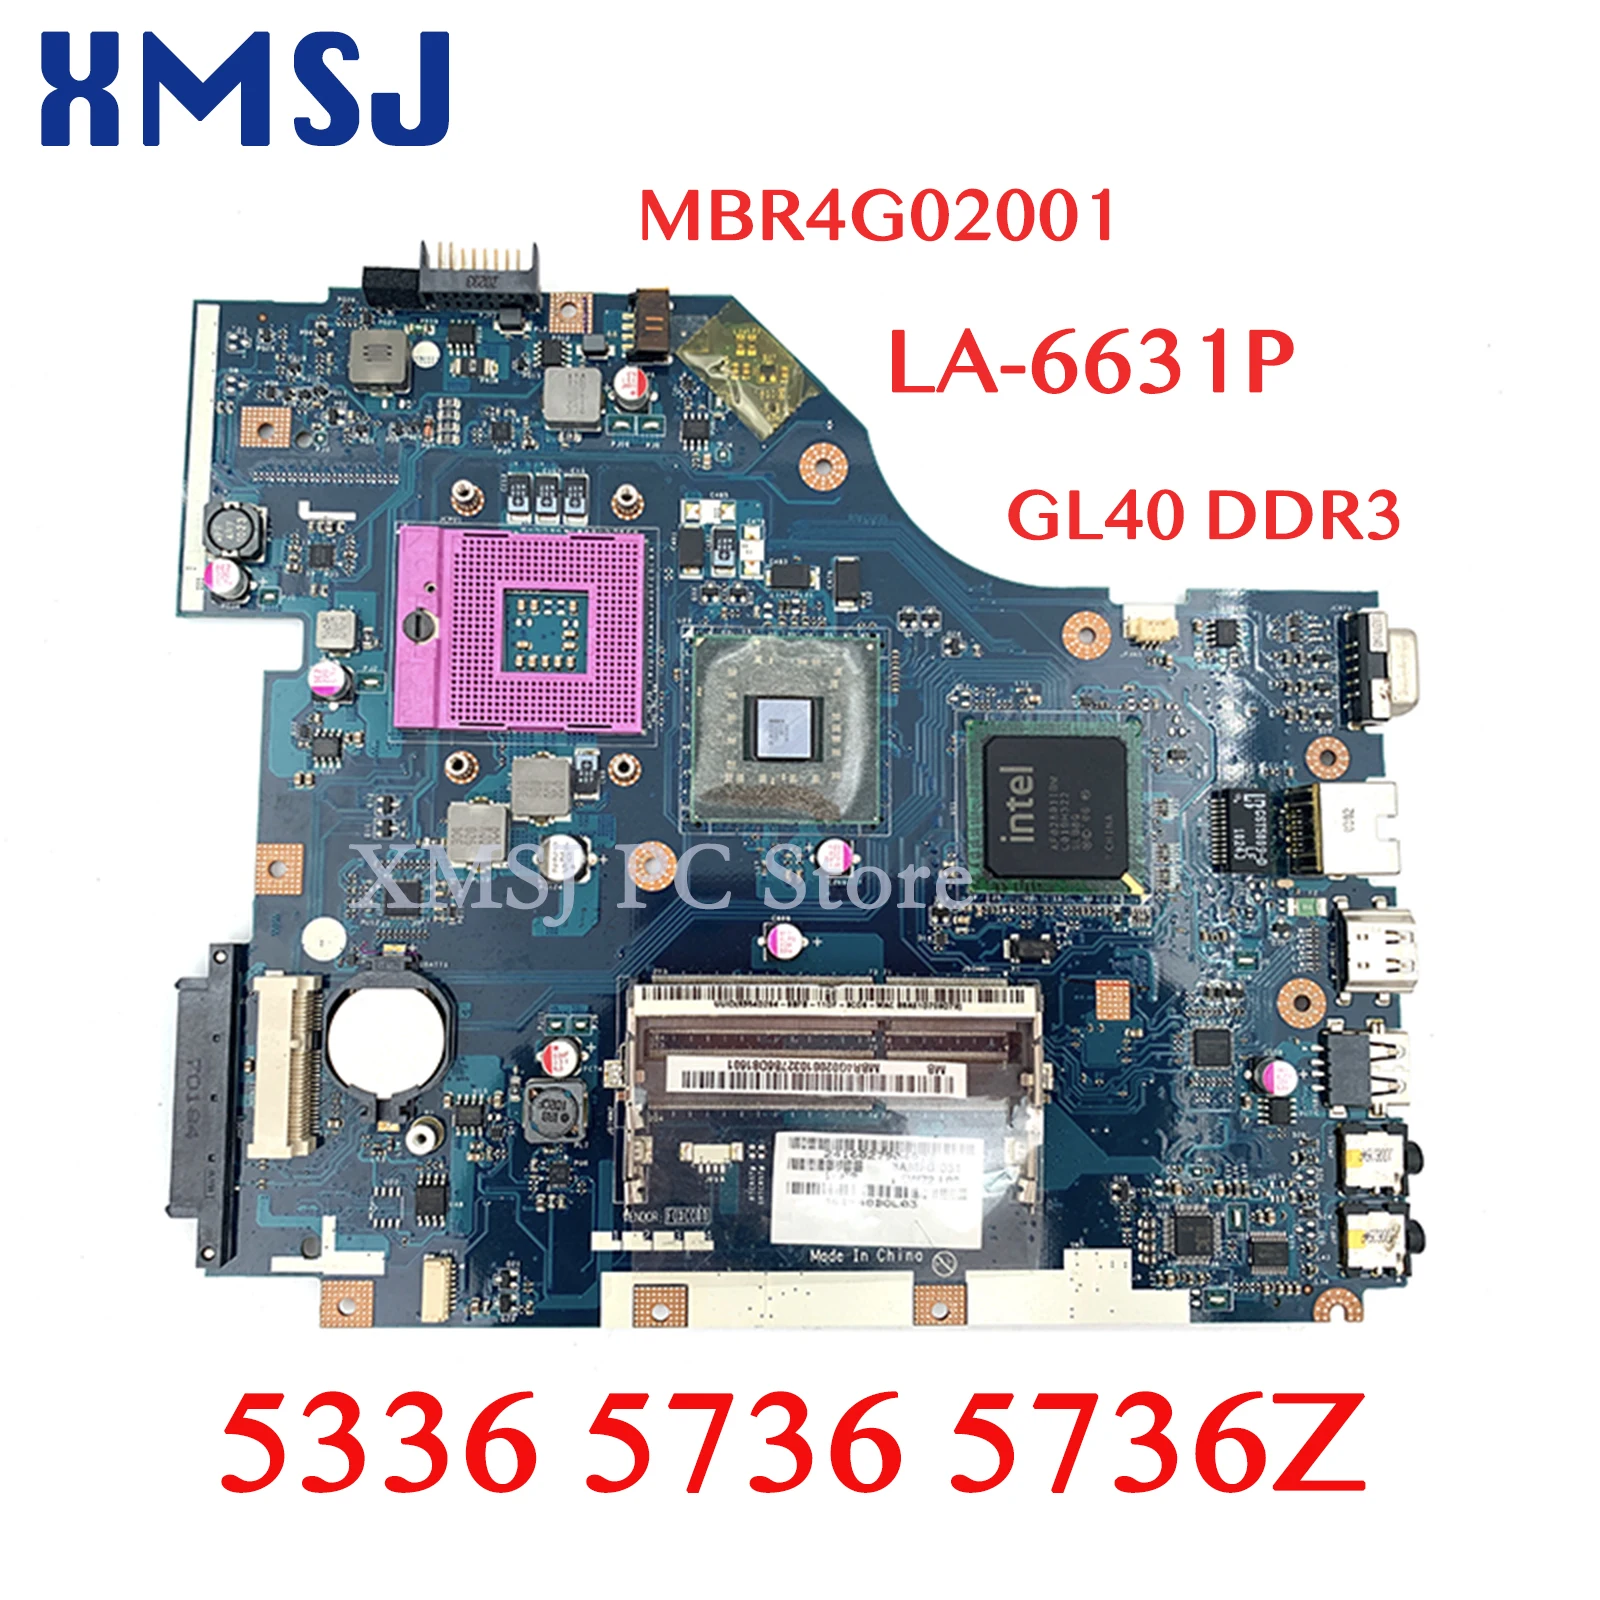 

XMSJ Laptop Motherboard PEW72 LA-6631P for ACER 5336 5736 5736z series MBR4G02001 Mainboard GL40 DDR3 Free CPU full test